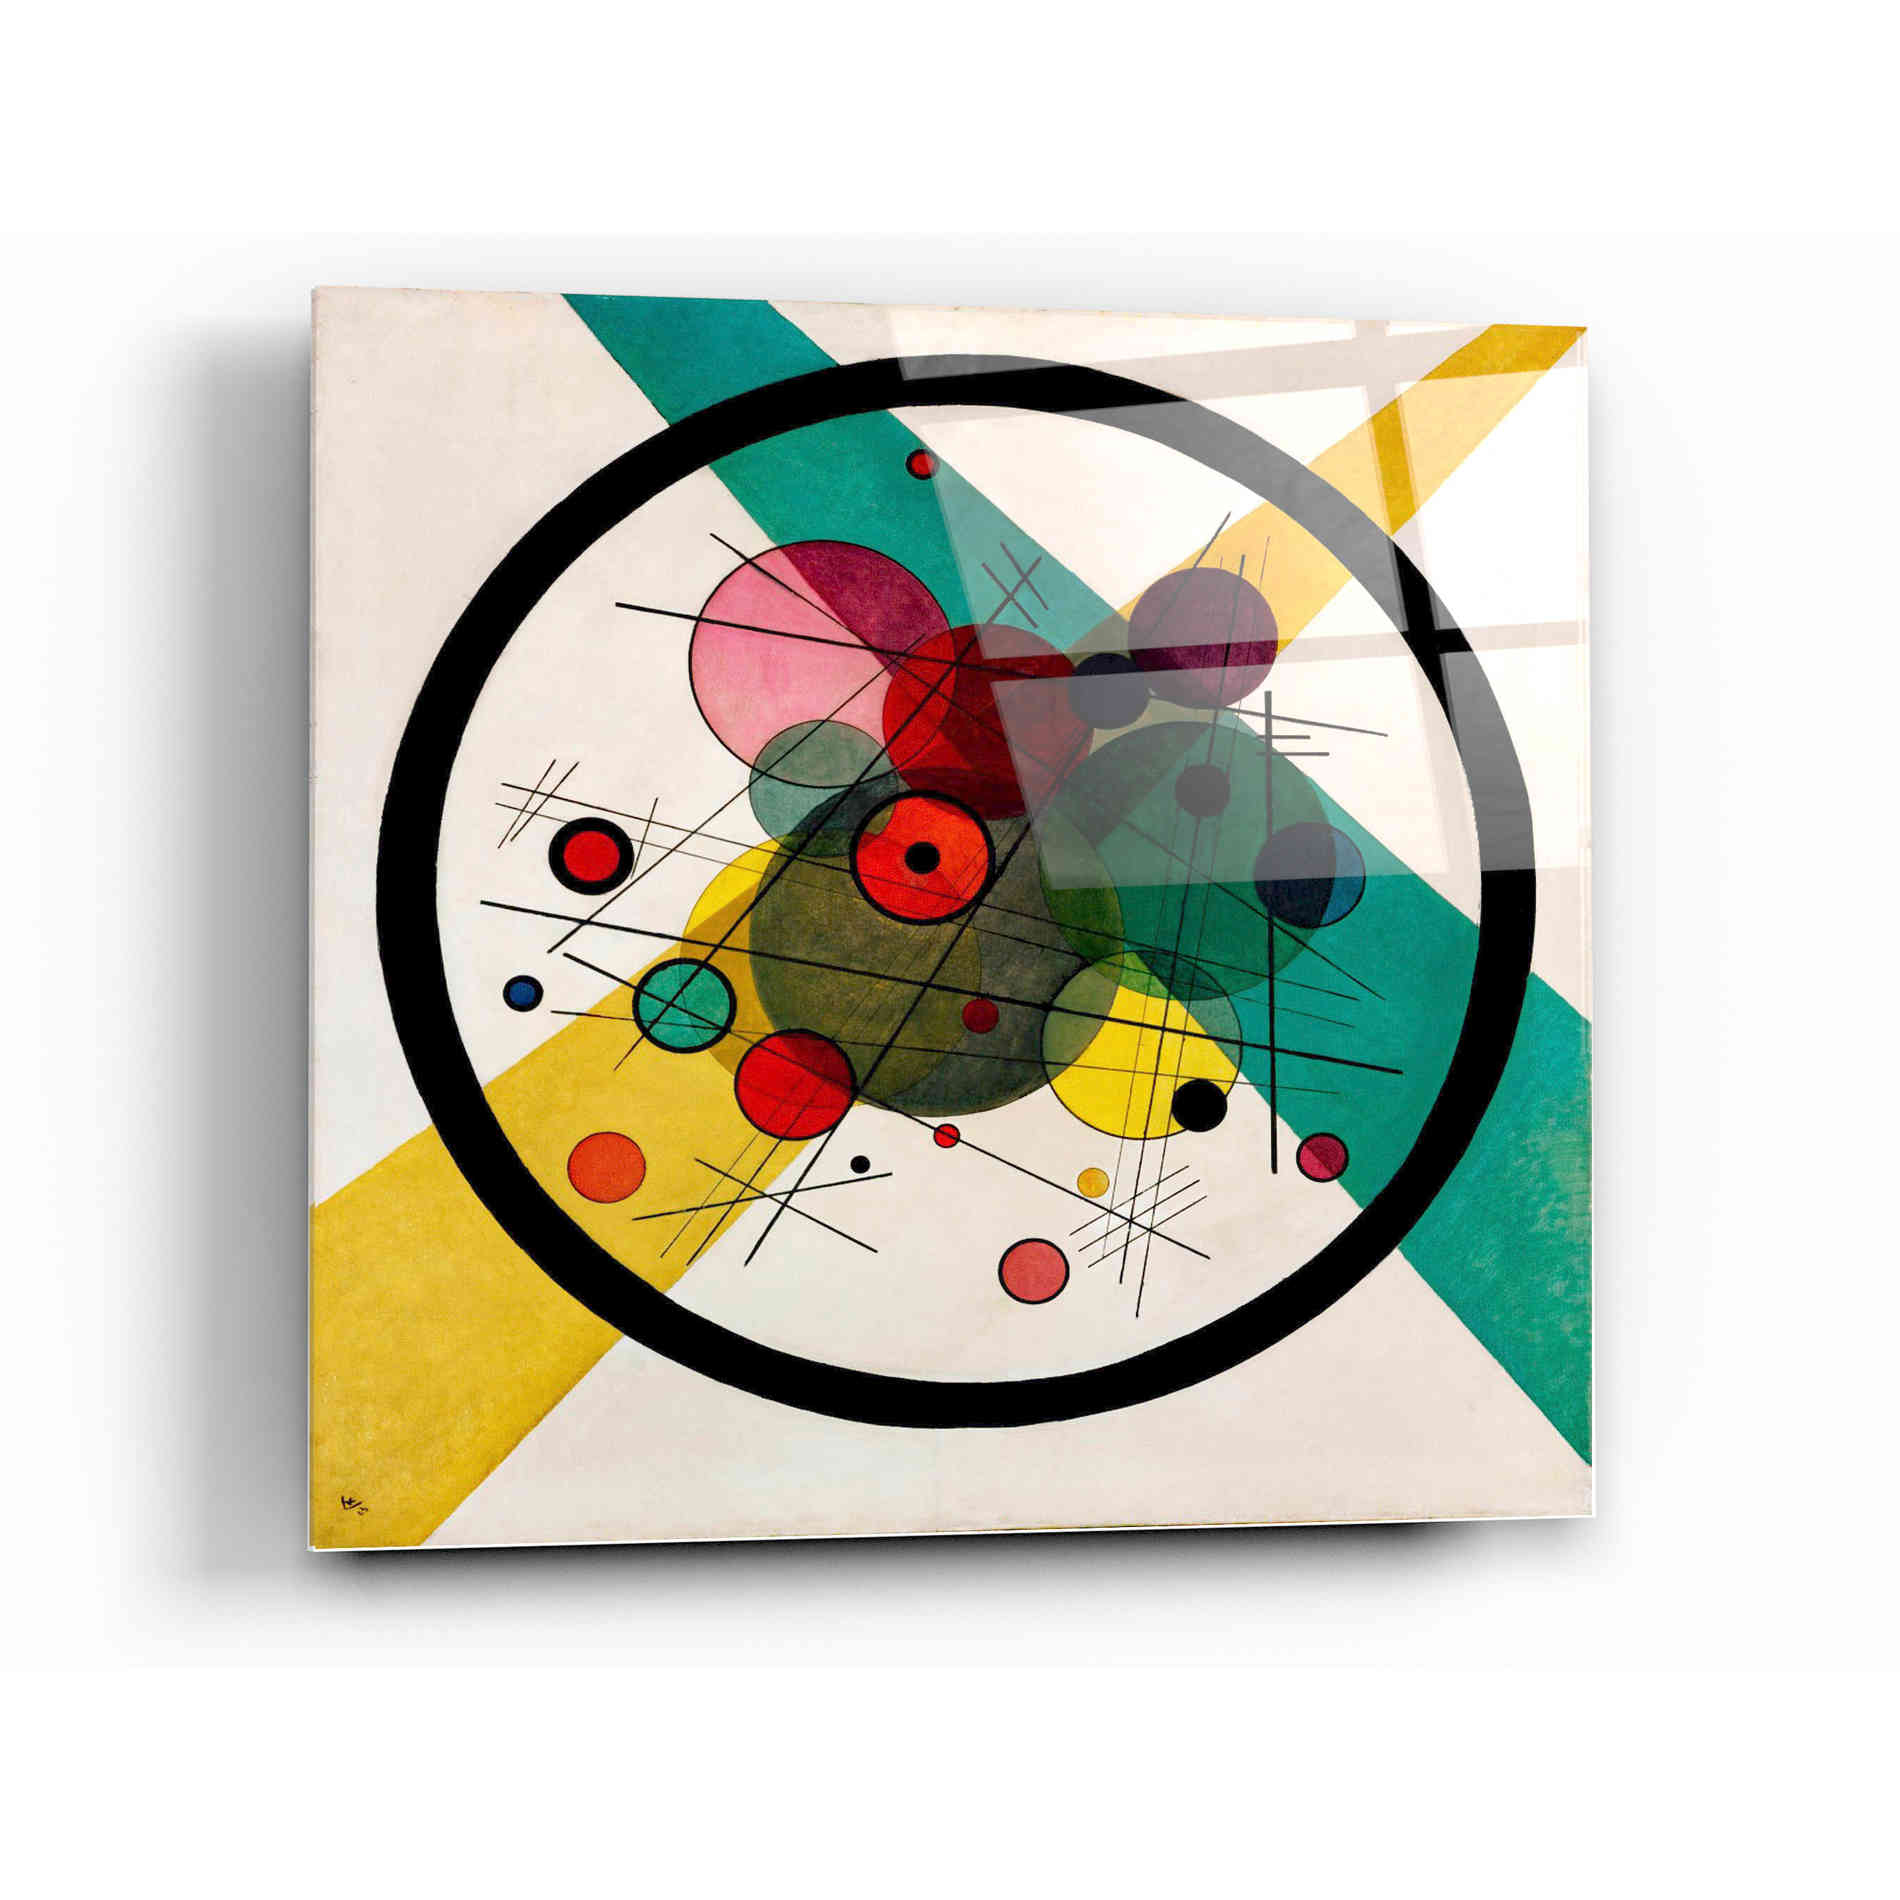 Epic Art 'Circles In A Circle' by Wassily Kandinsky Acrylic Glass Wall Art,12x12